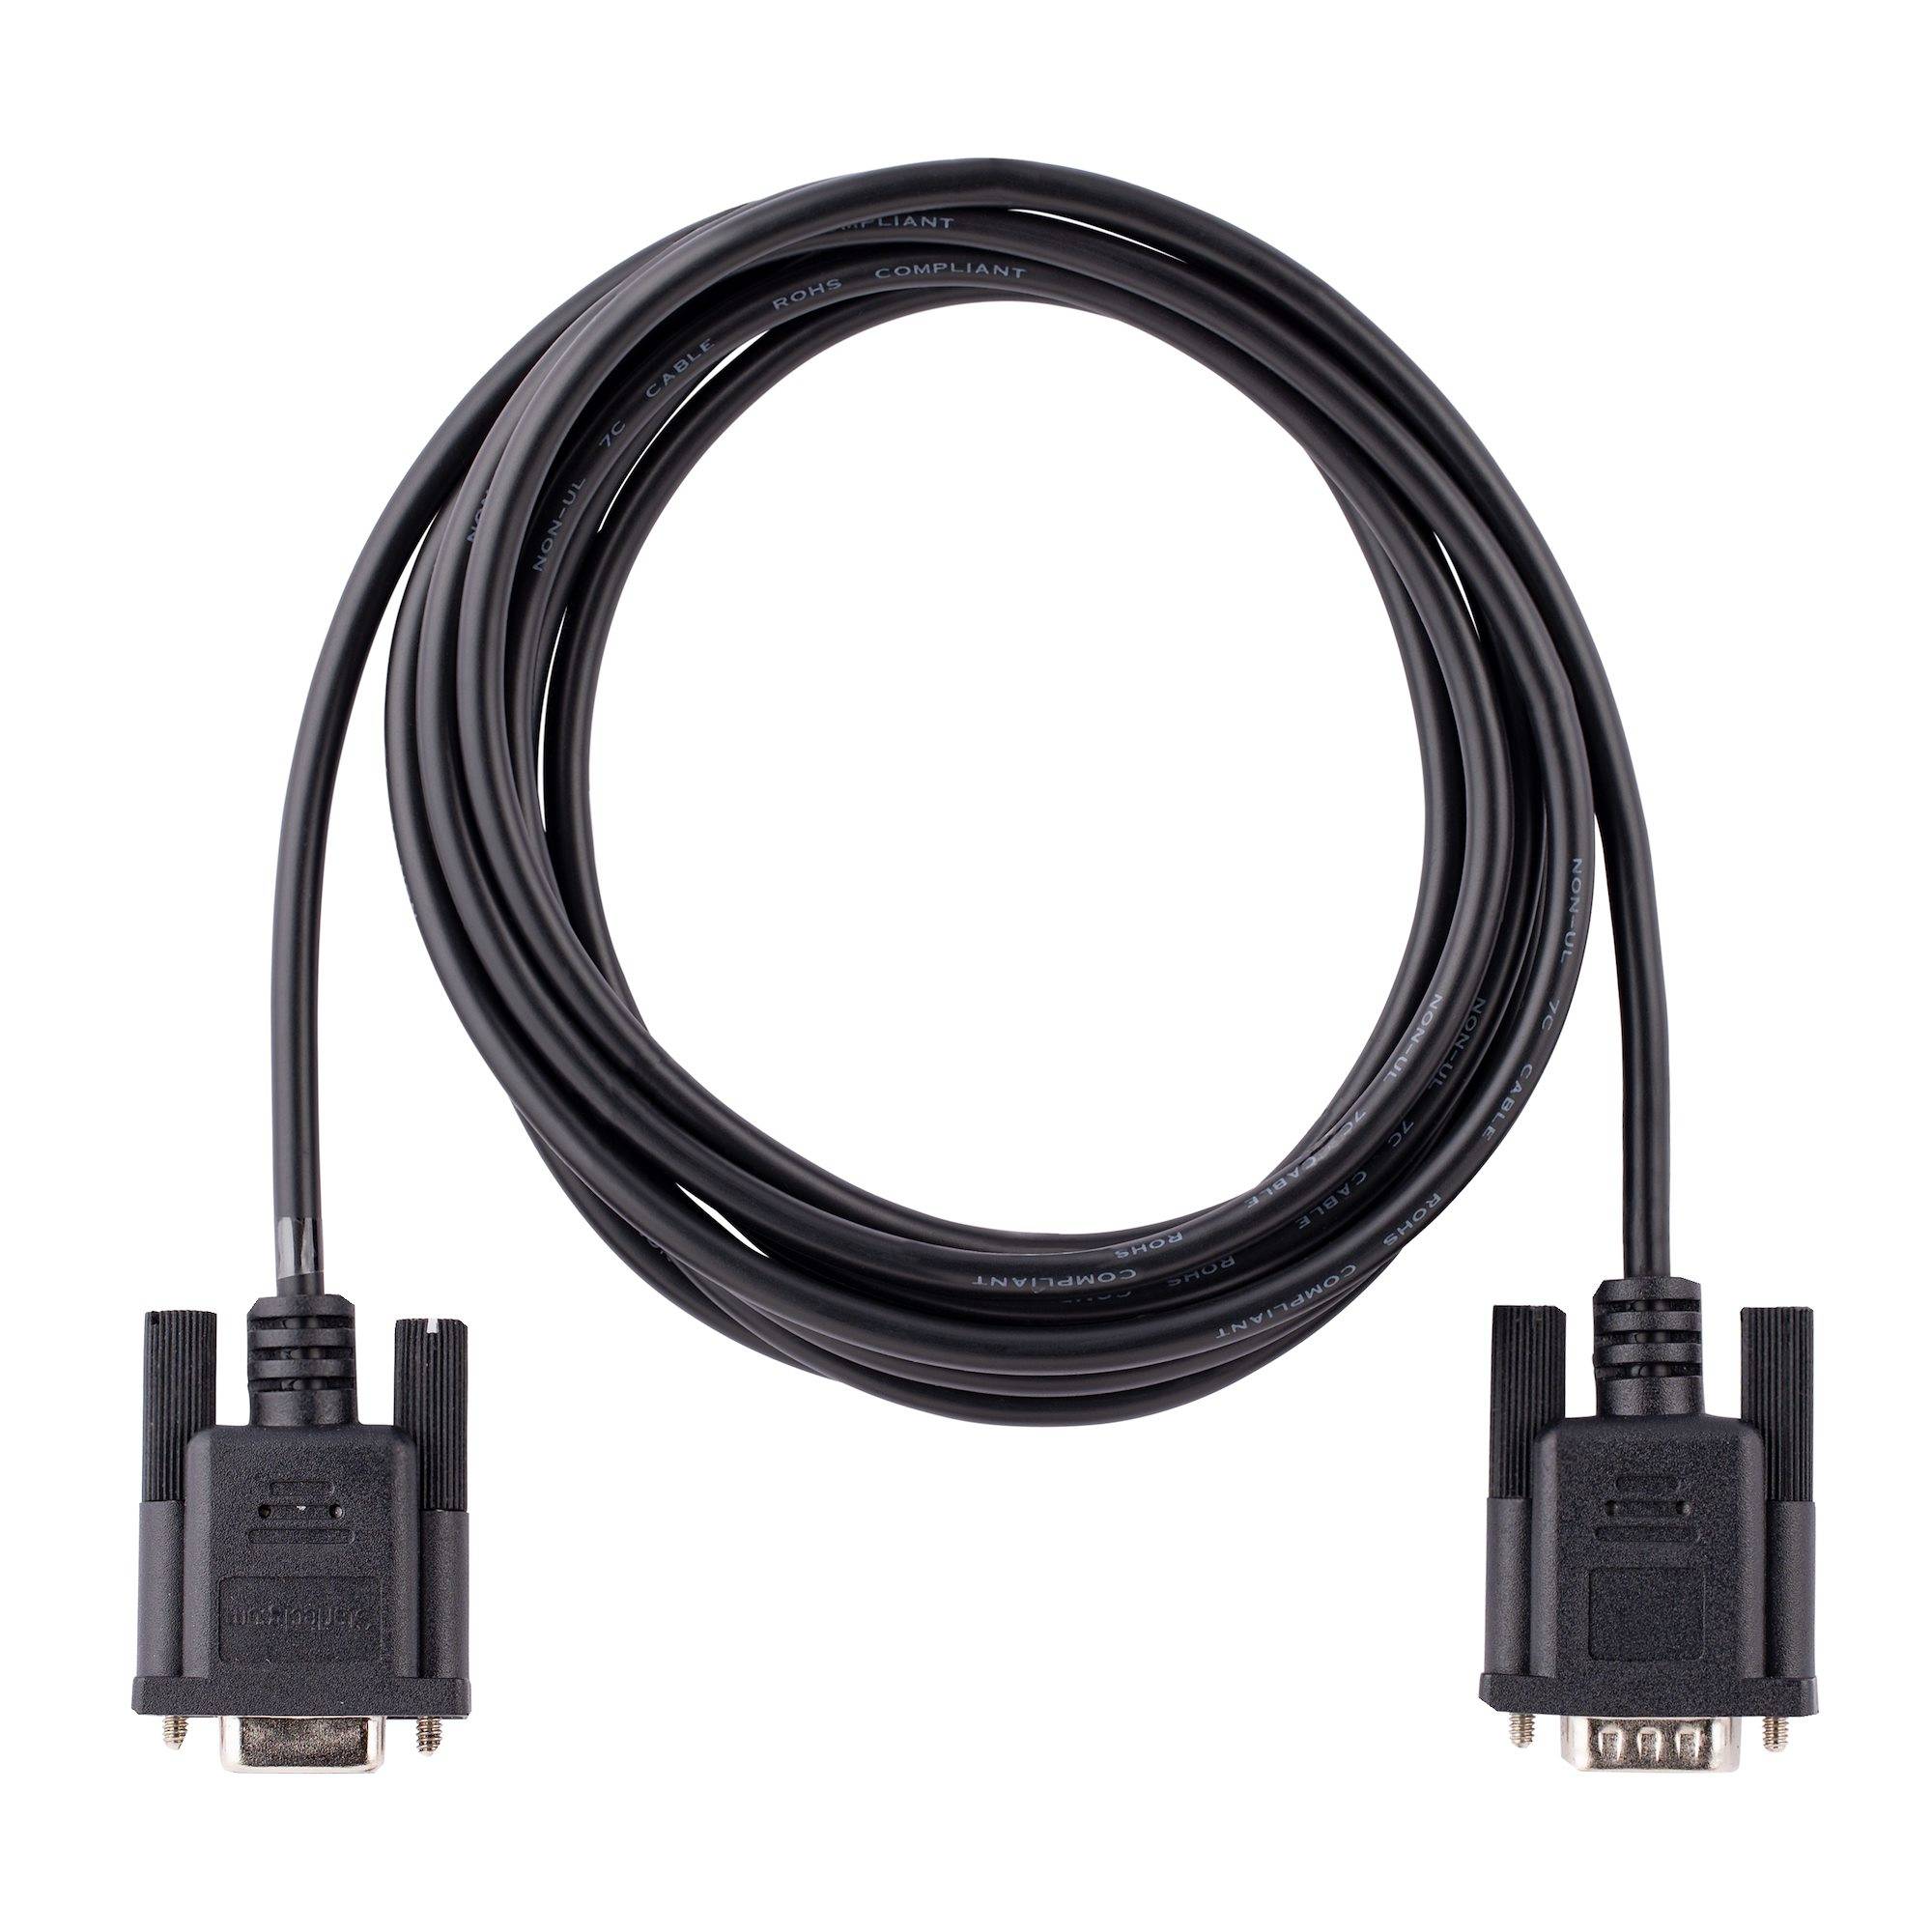 Rca Informatique - image du produit : RS232 SERIAL NULL MODEM CABLE - 3M CROSSOVER SERIAL CABLE